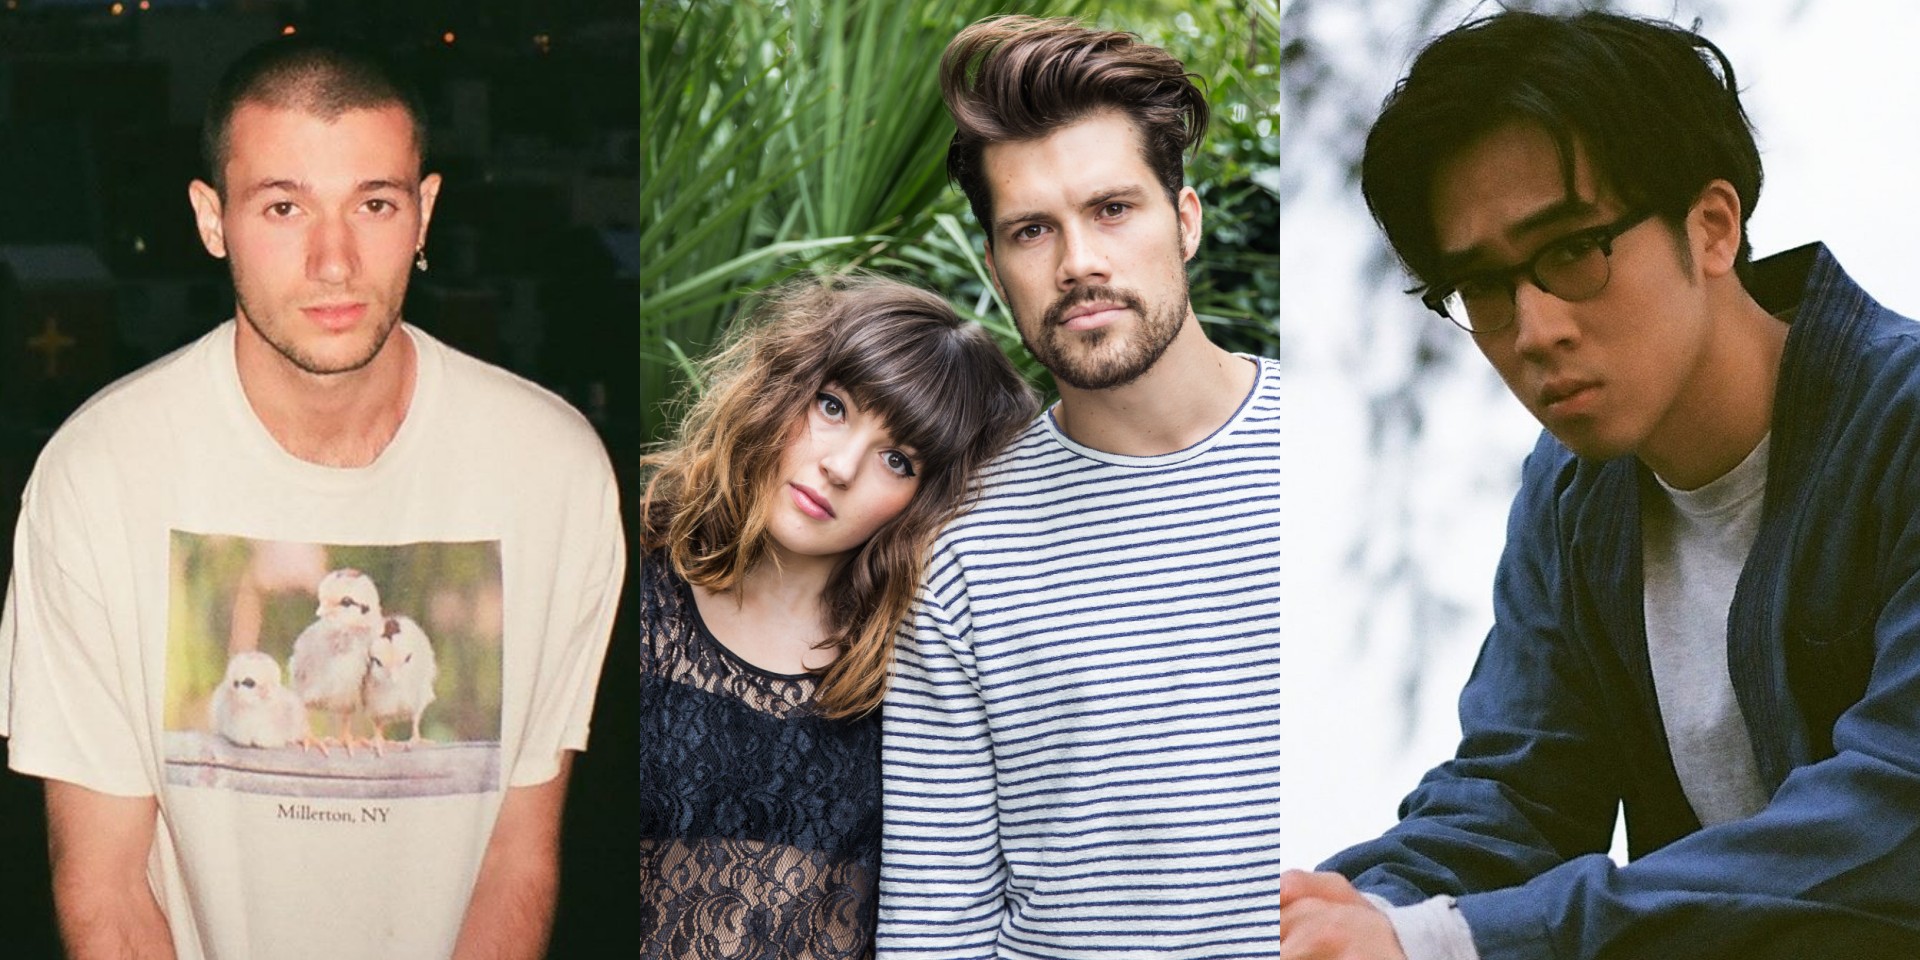 Universal Music Singapore announces invite-only perfomances featuring Jeremy Zucker, Oh Wonder, Charlie Lim and more